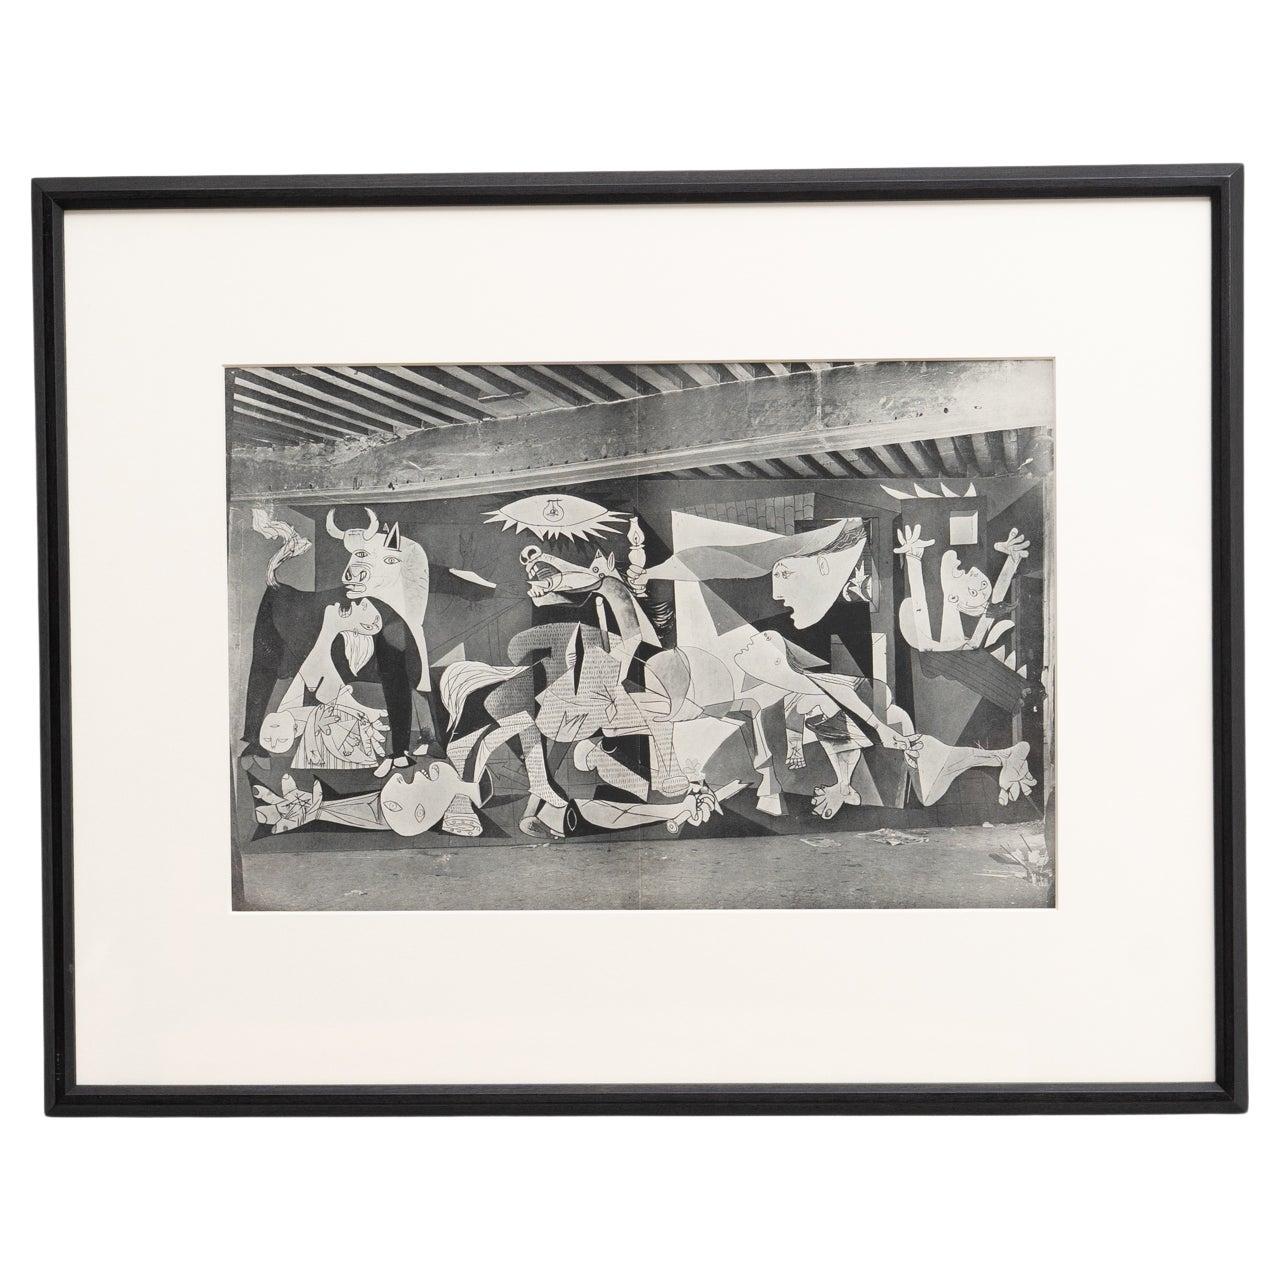 Picasso's "Guernica, " from Verve 'Photograph by Dora Maar' For Sale